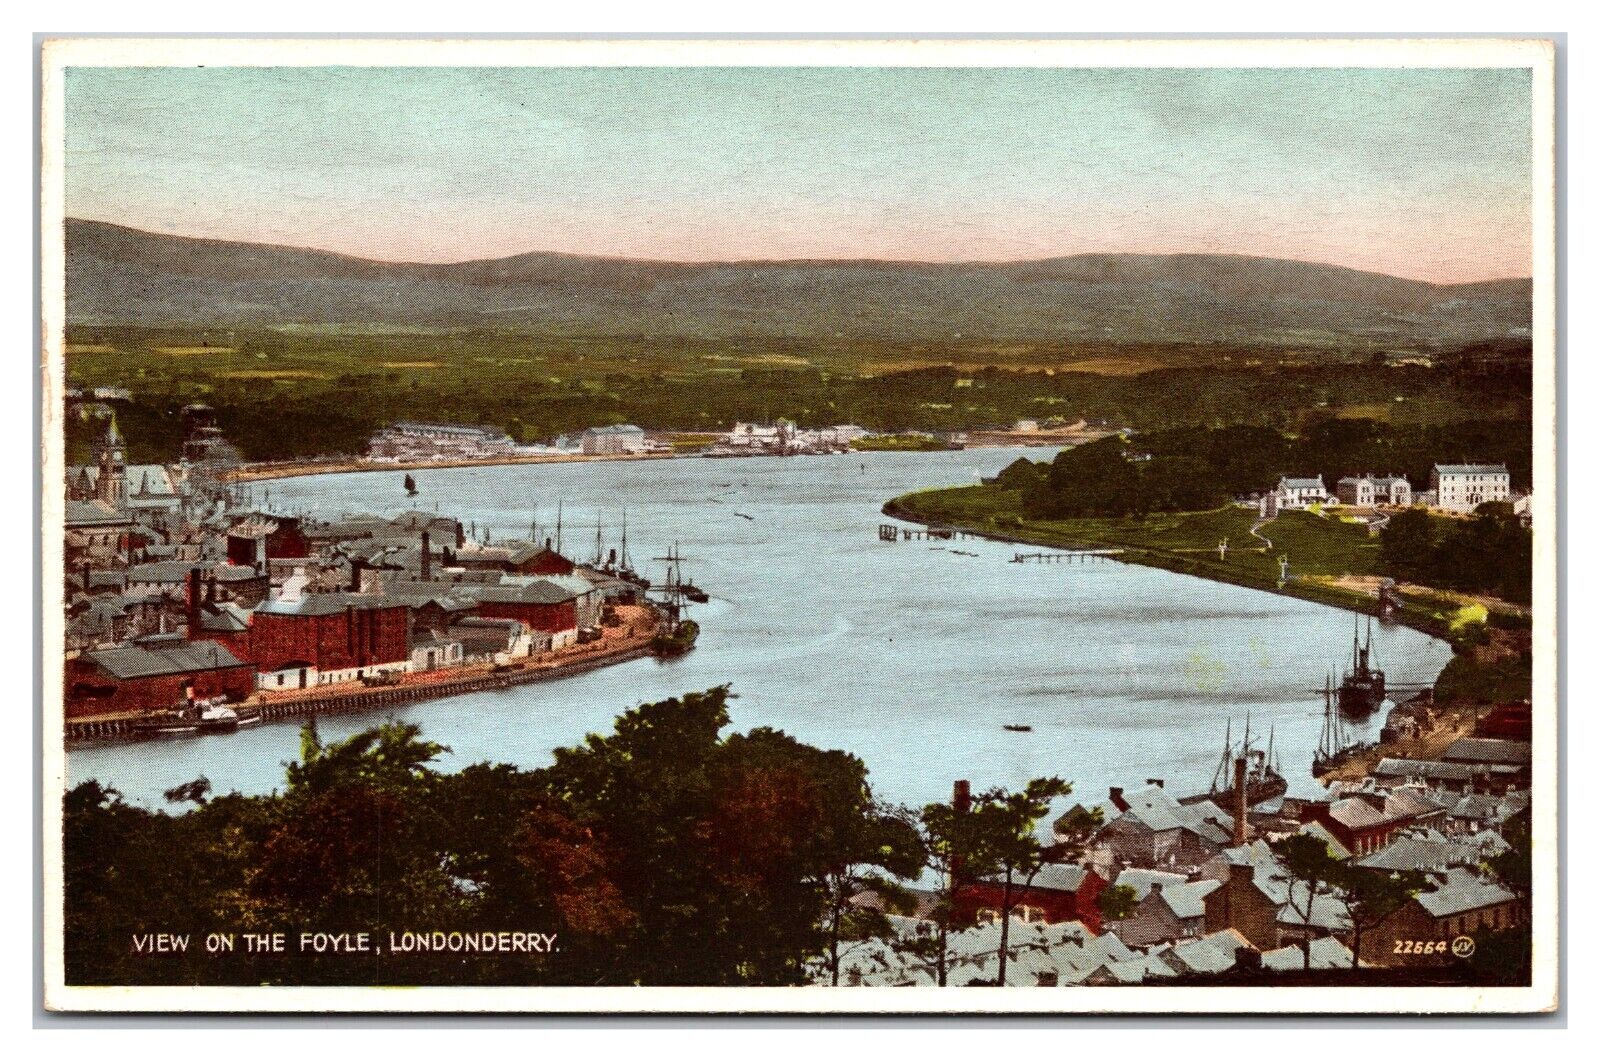 The View On The Foyle, Londonderry Postcard